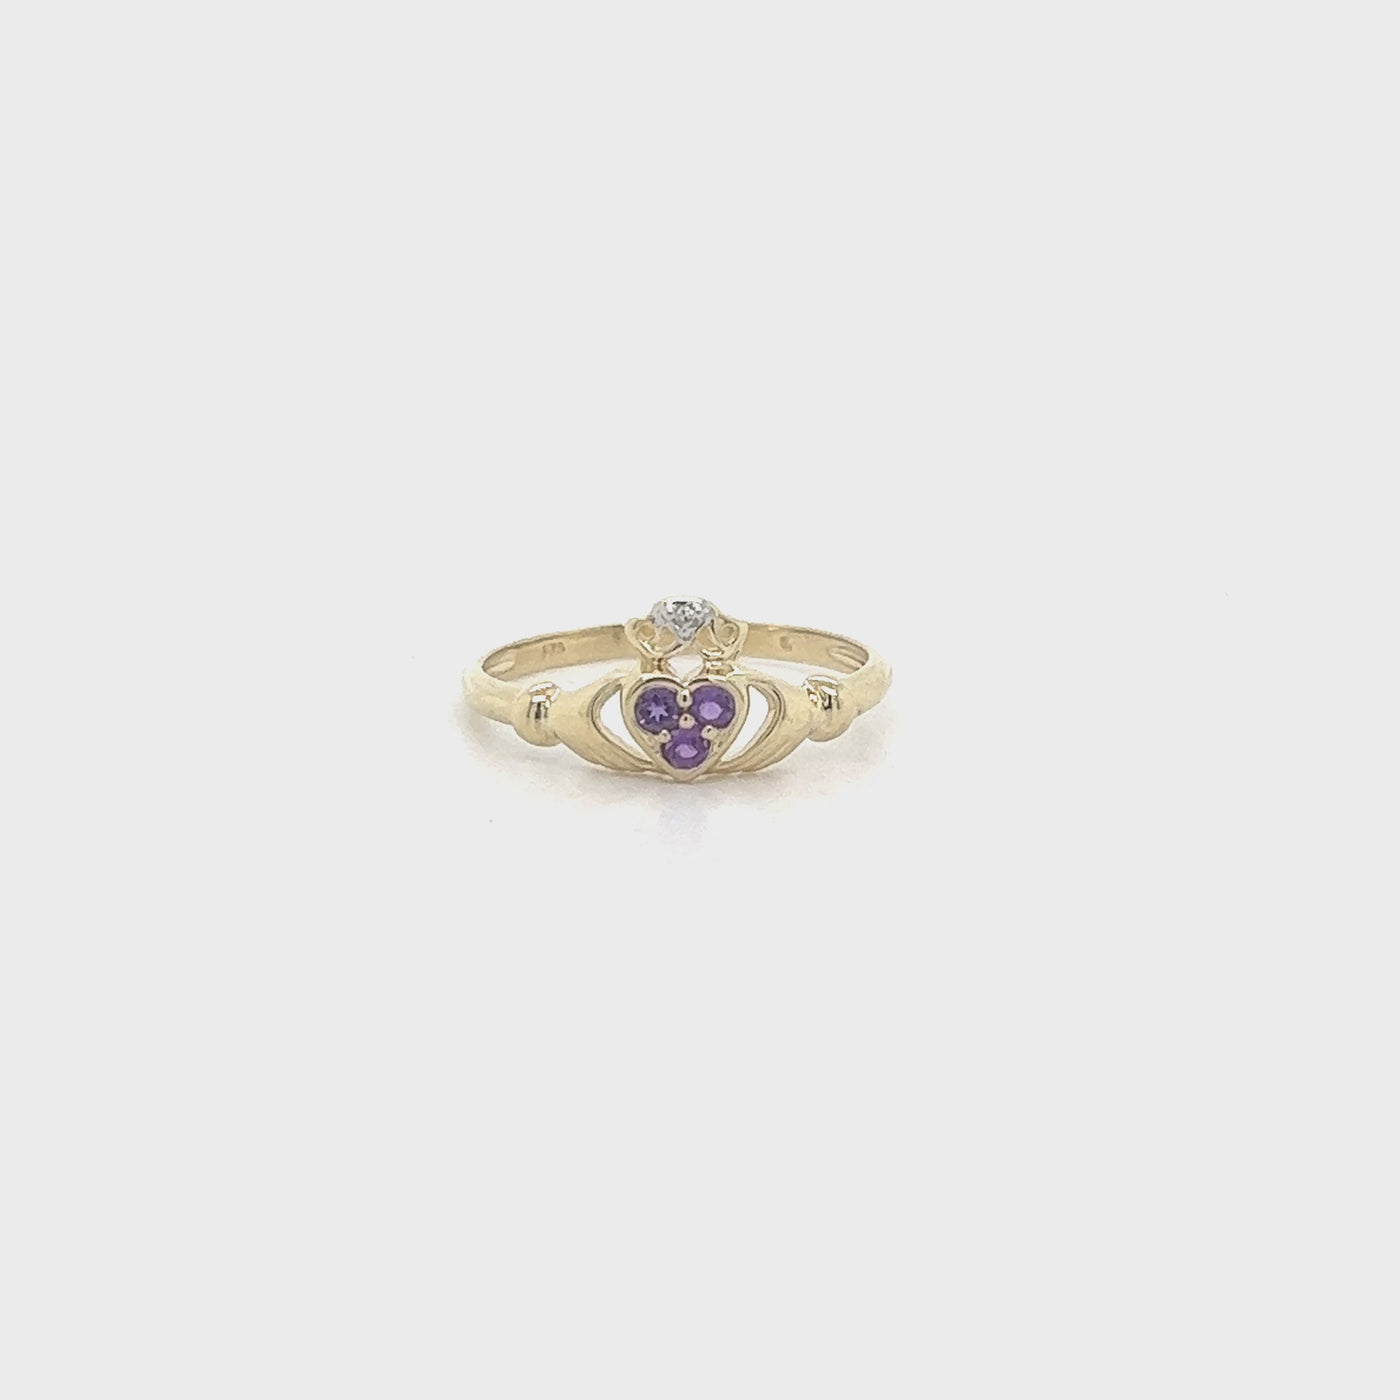 Irish Claddagh Ring with Amethysts in 9ct Yellow Gold.